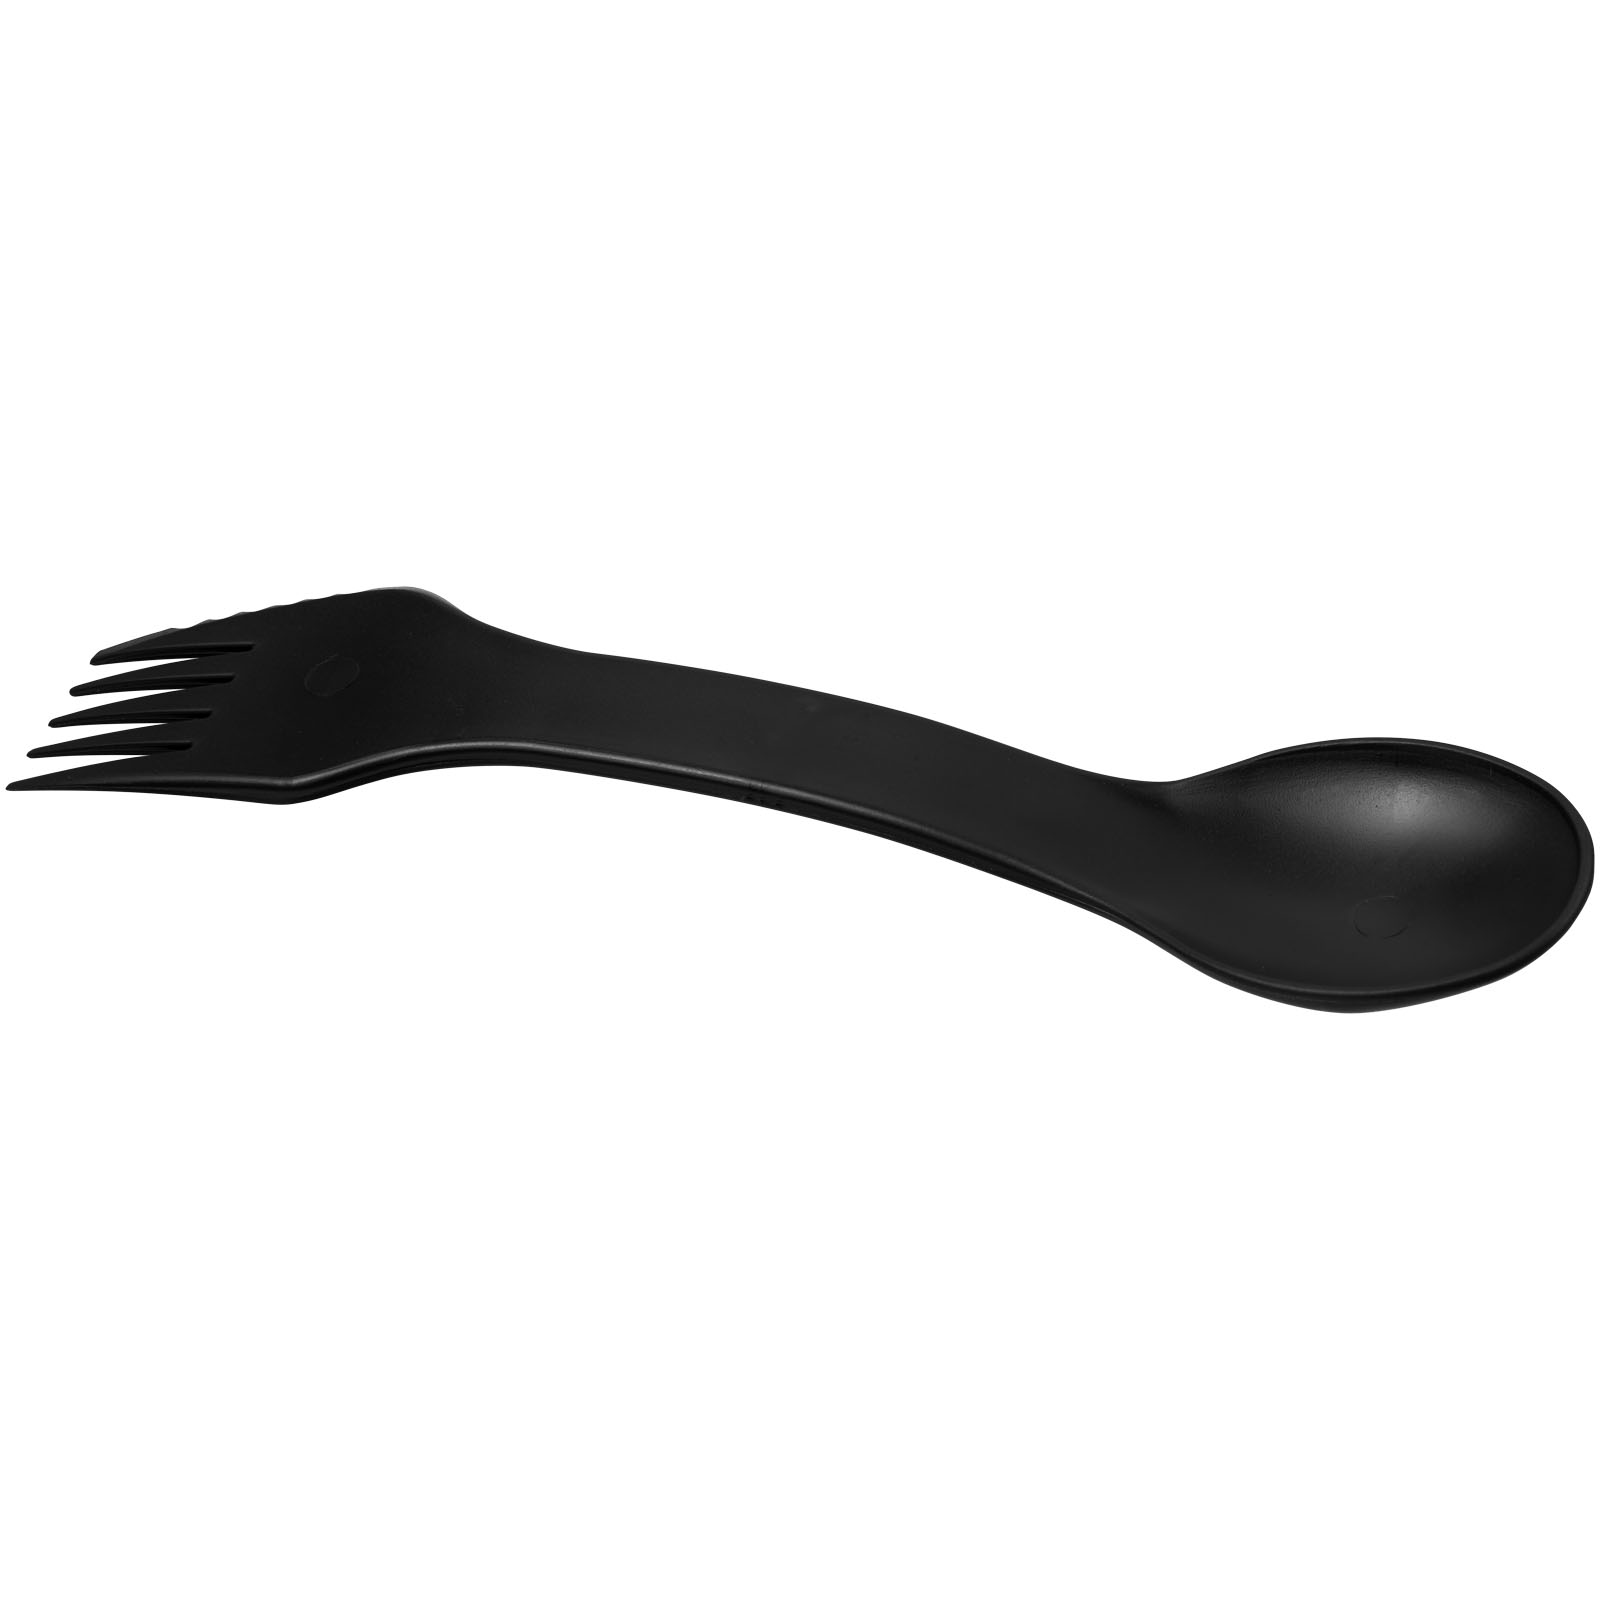 Advertising Kitchenware - Epsy 3-in-1 spoon, fork, and knife - 0